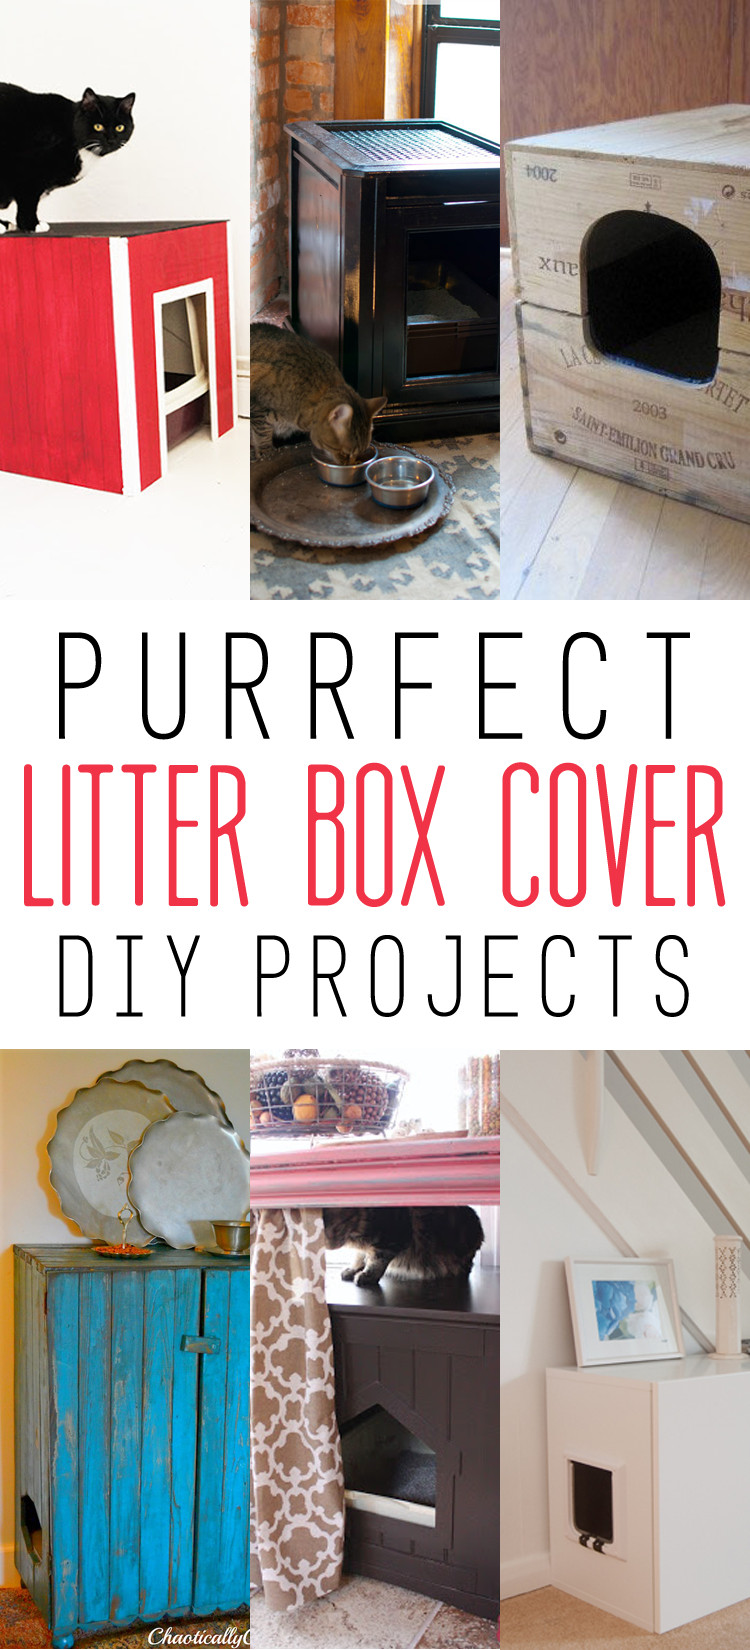 DIY Cat Litter Box Cover
 Purrfect Litter Box Cover DIY Projects